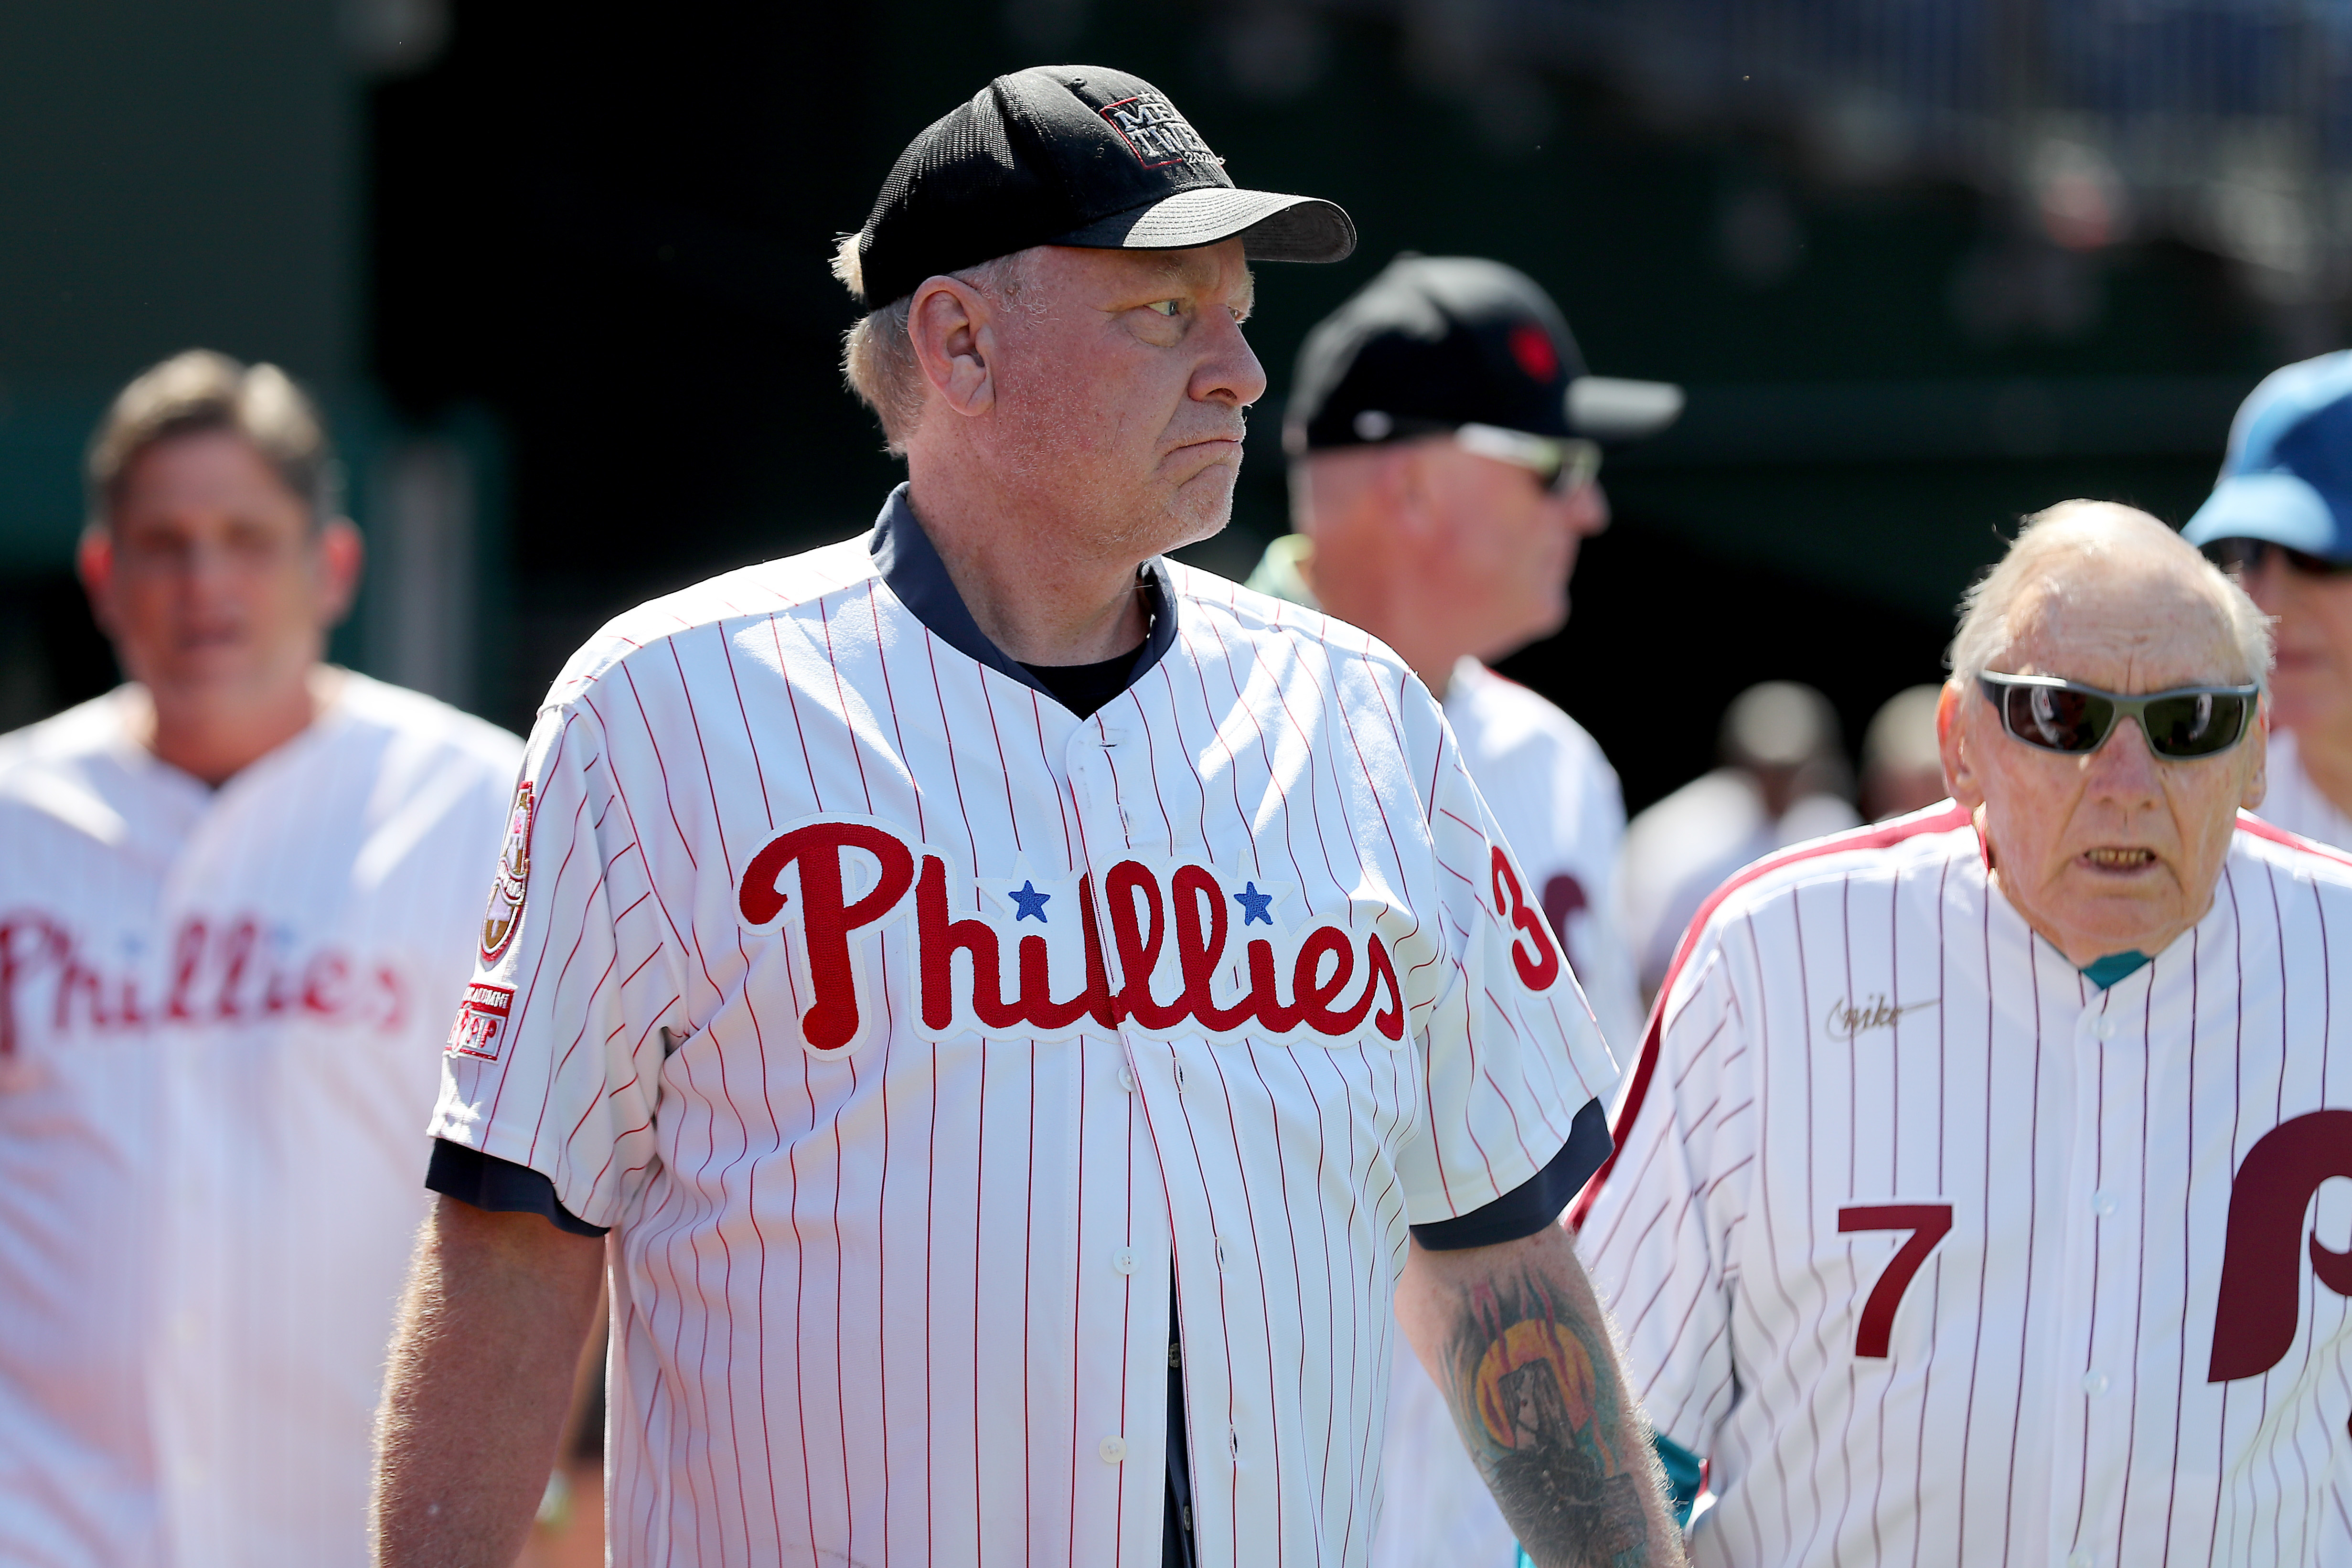 Alec Bohm, Rob Thomson tossed as Phillies fail to score in 3-0